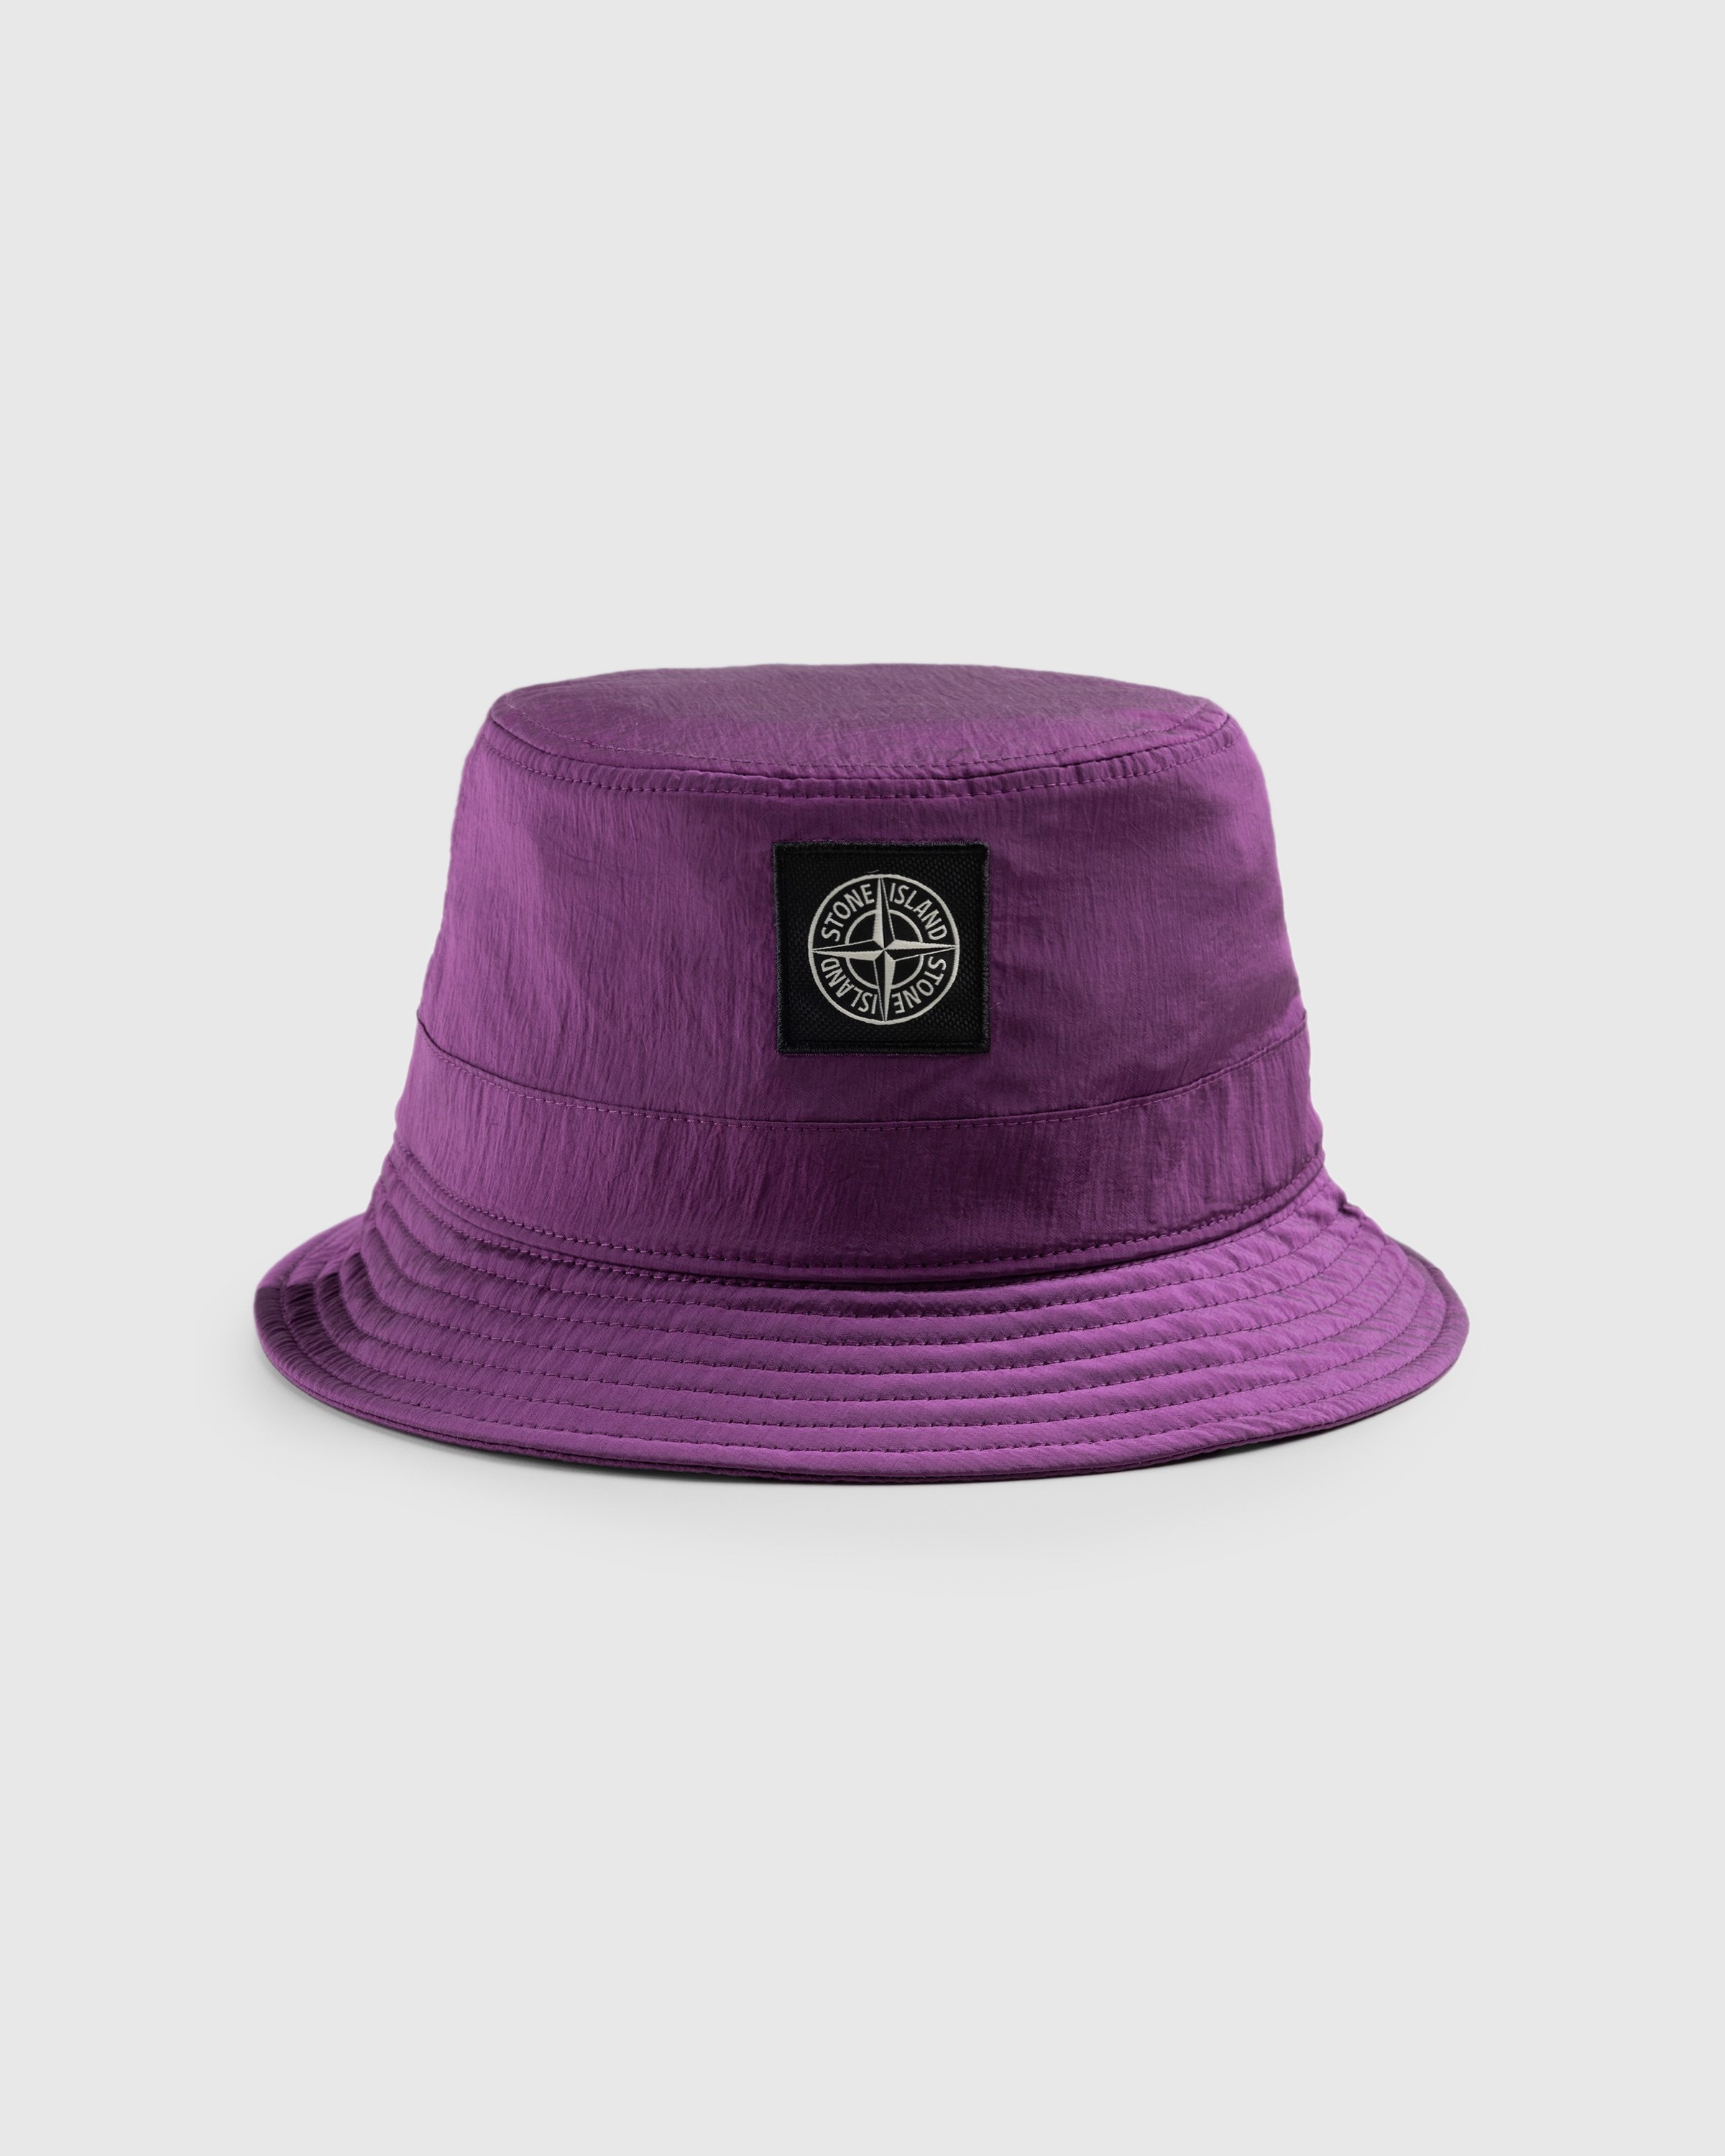 Stone Island – Cappello Pink 781599376 - Hats - Pink - Image 1